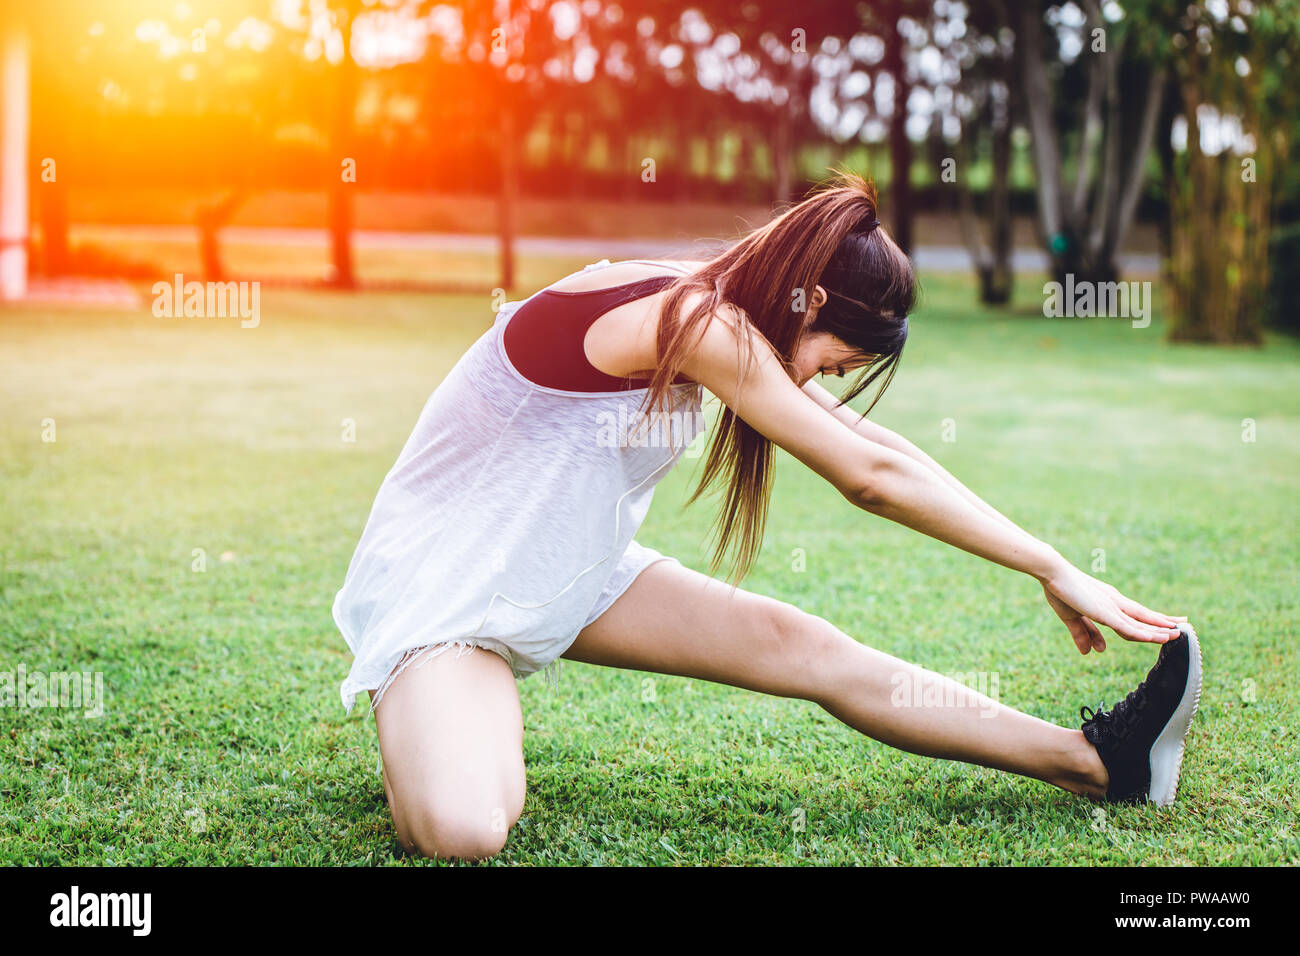 healthy slim girl leg stretching warm up before running or jogging Stock Photo